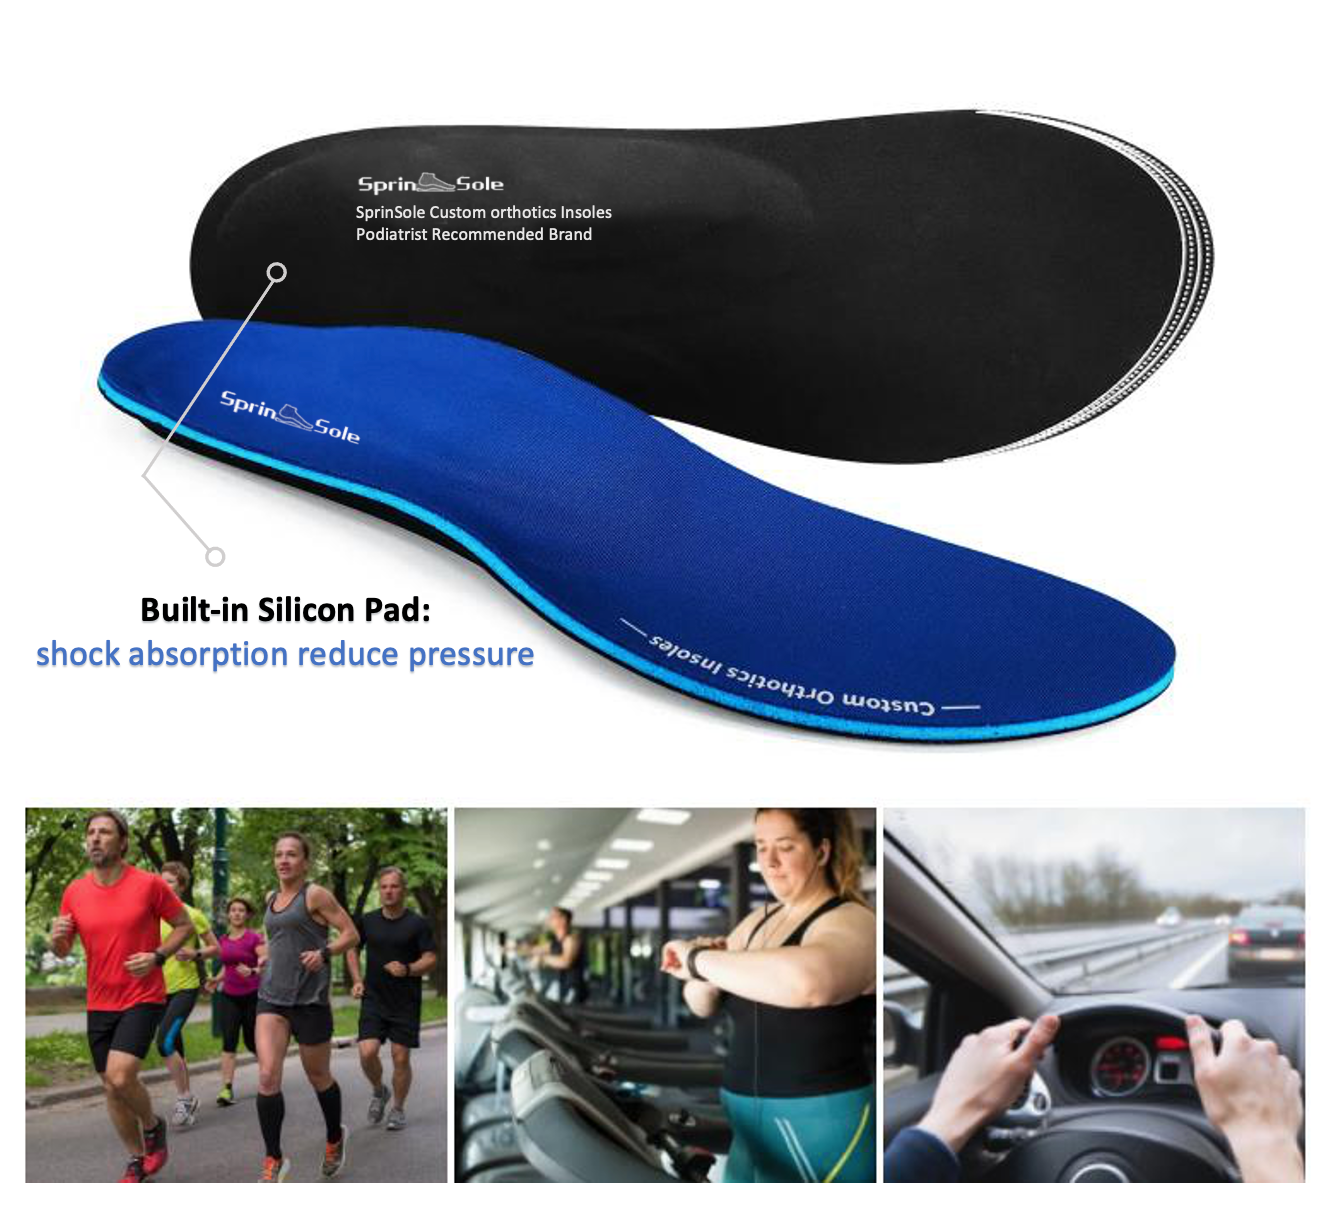 SprinSole custom orthotics front and bottom view